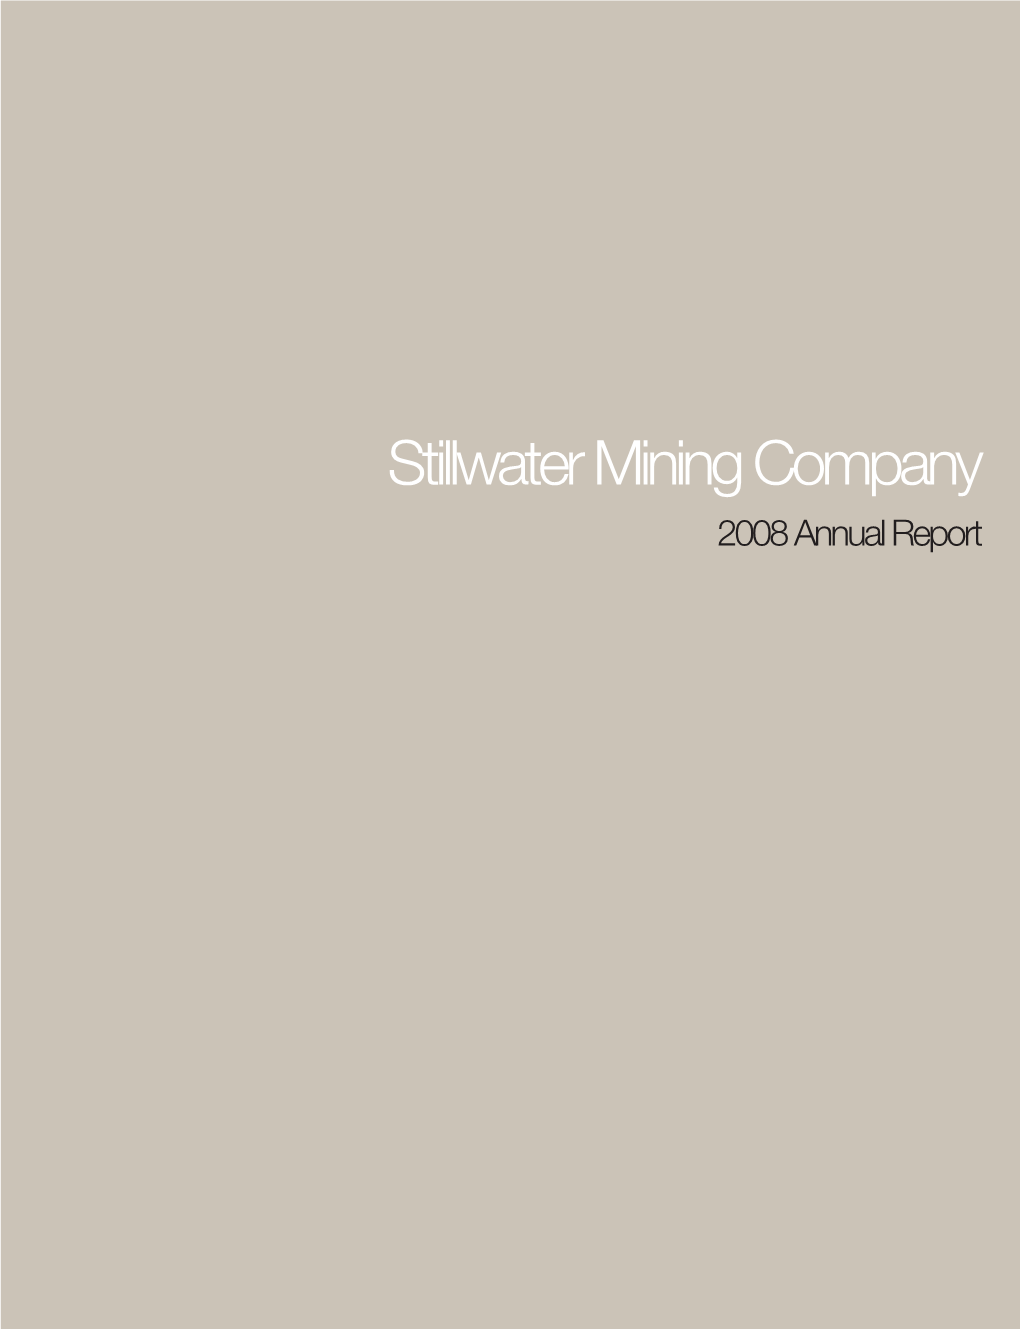 Stillwater Mining Company 2008 Annual Report Financial Highlights